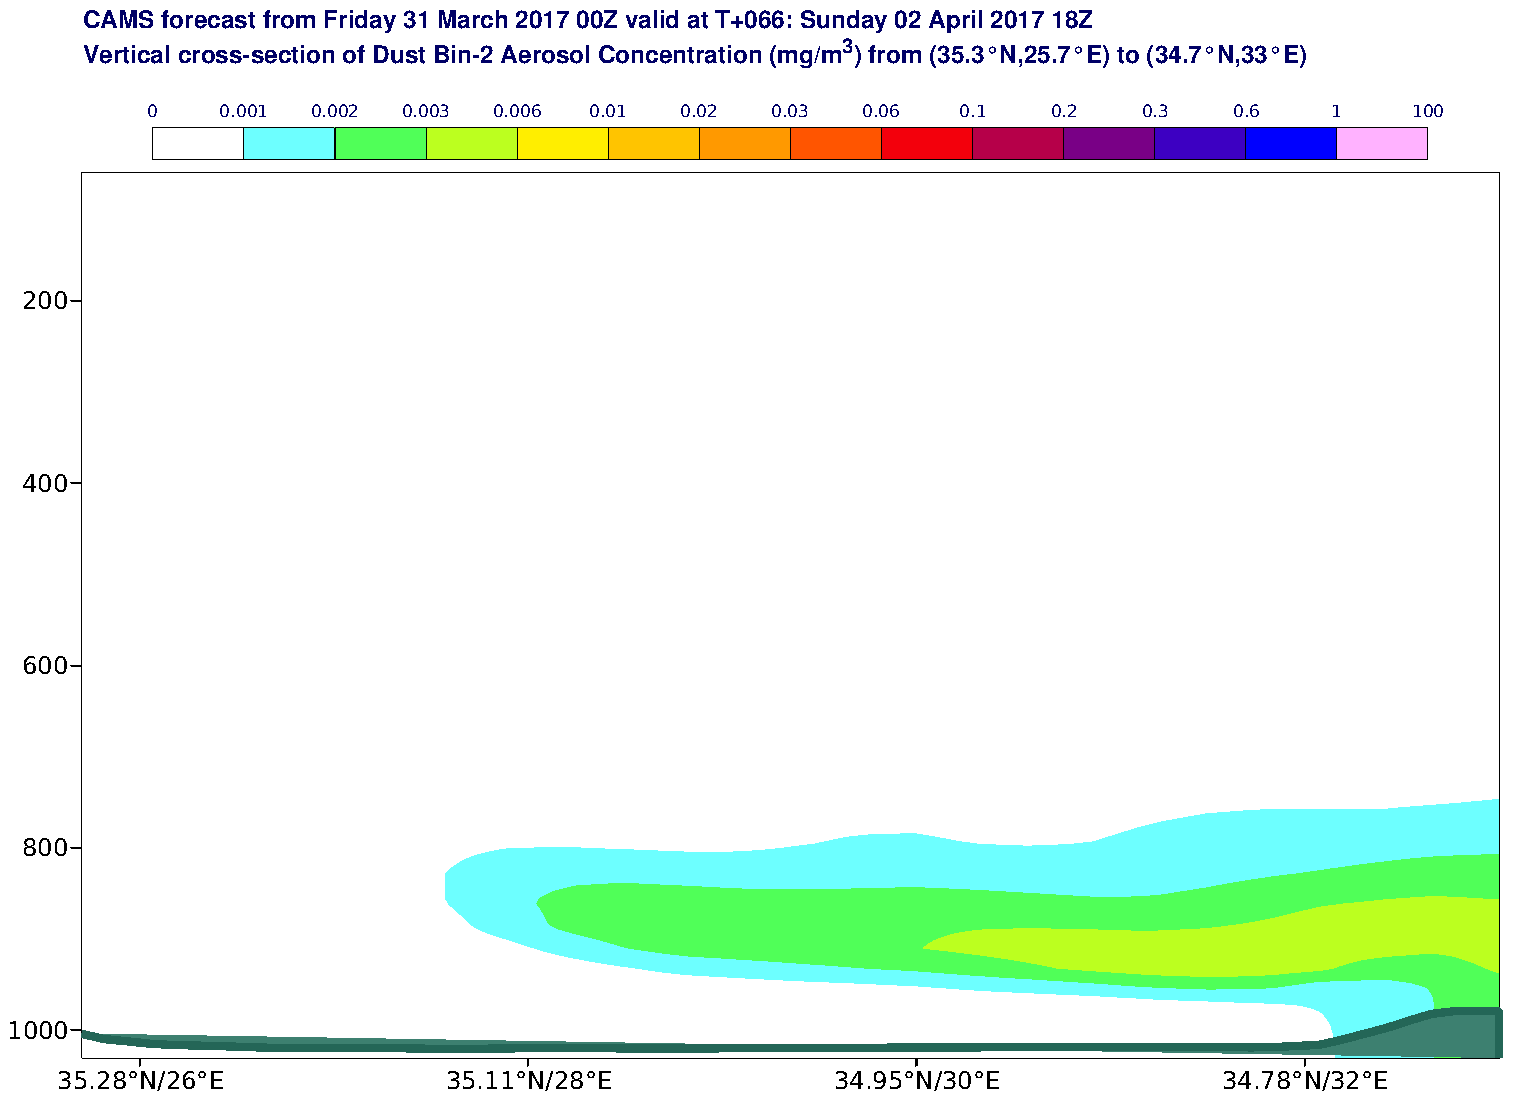 Vertical cross-section of Dust Bin-2 Aerosol Concentration (mg/m3) valid at T66 - 2017-04-02 18:00